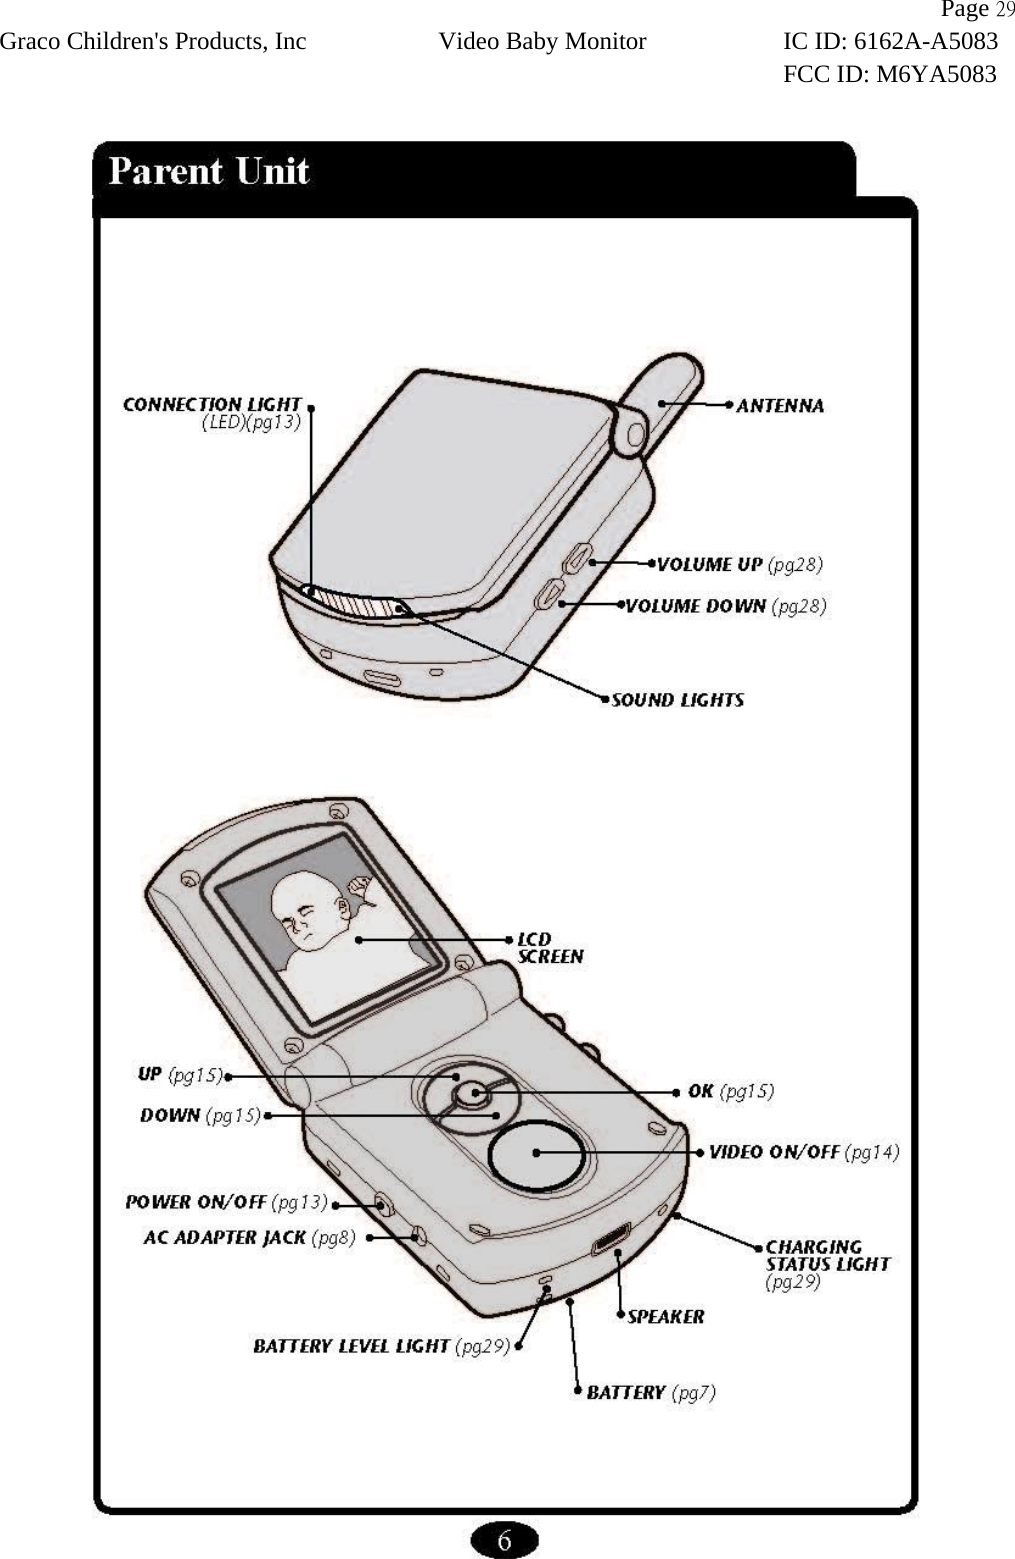                Page 29 Graco Children&apos;s Products, Inc Video Baby Monitor IC ID: 6162A-A5083 FCC ID: M6YA5083   